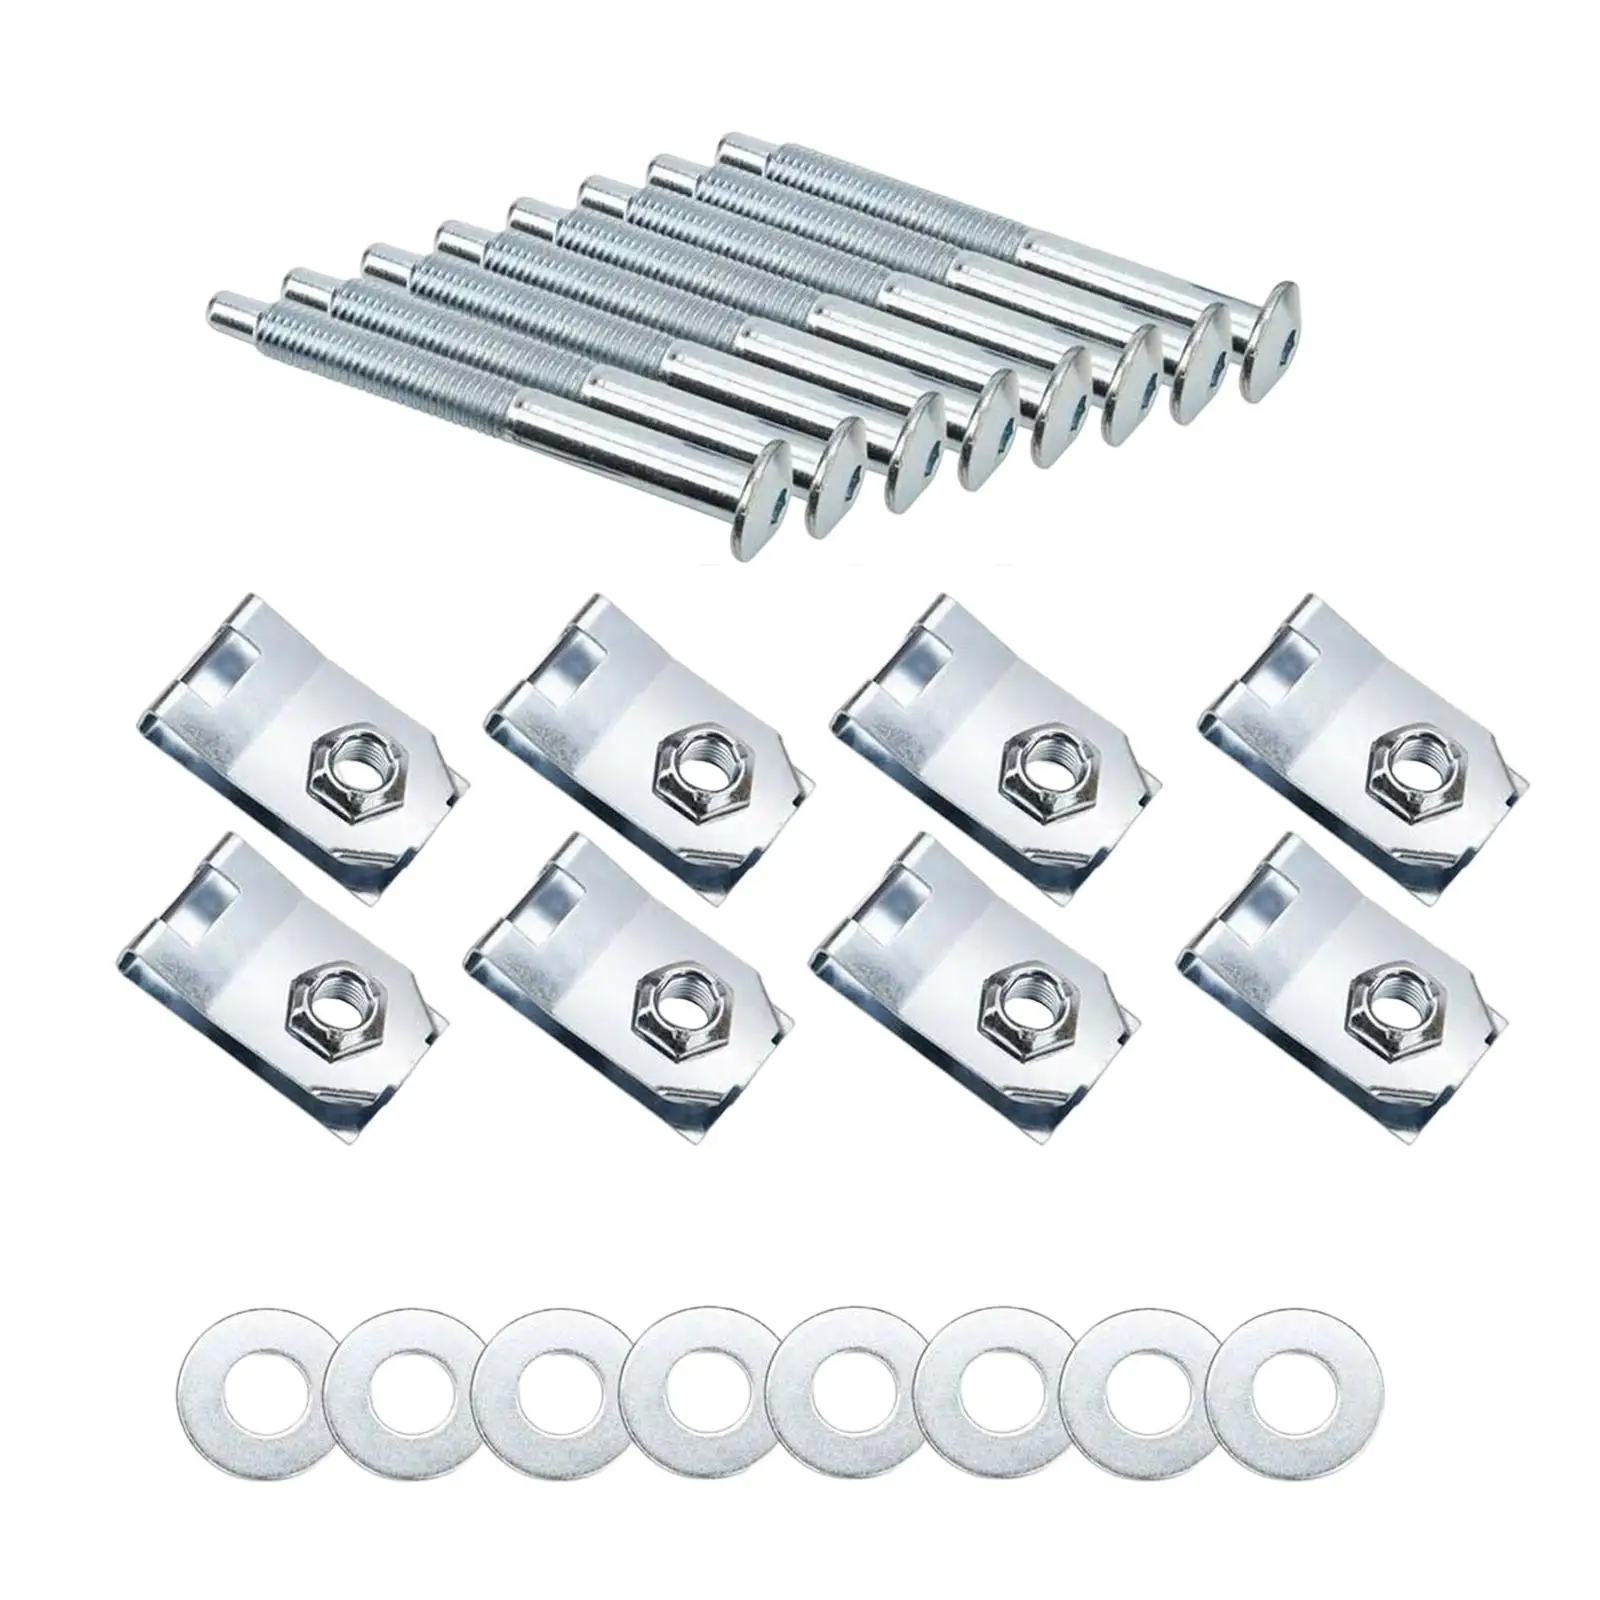 924 311 Truck Bed Mounting Bolt Kit Replacement Bolts Hardware Fasteners  Accessoires -  Accessories